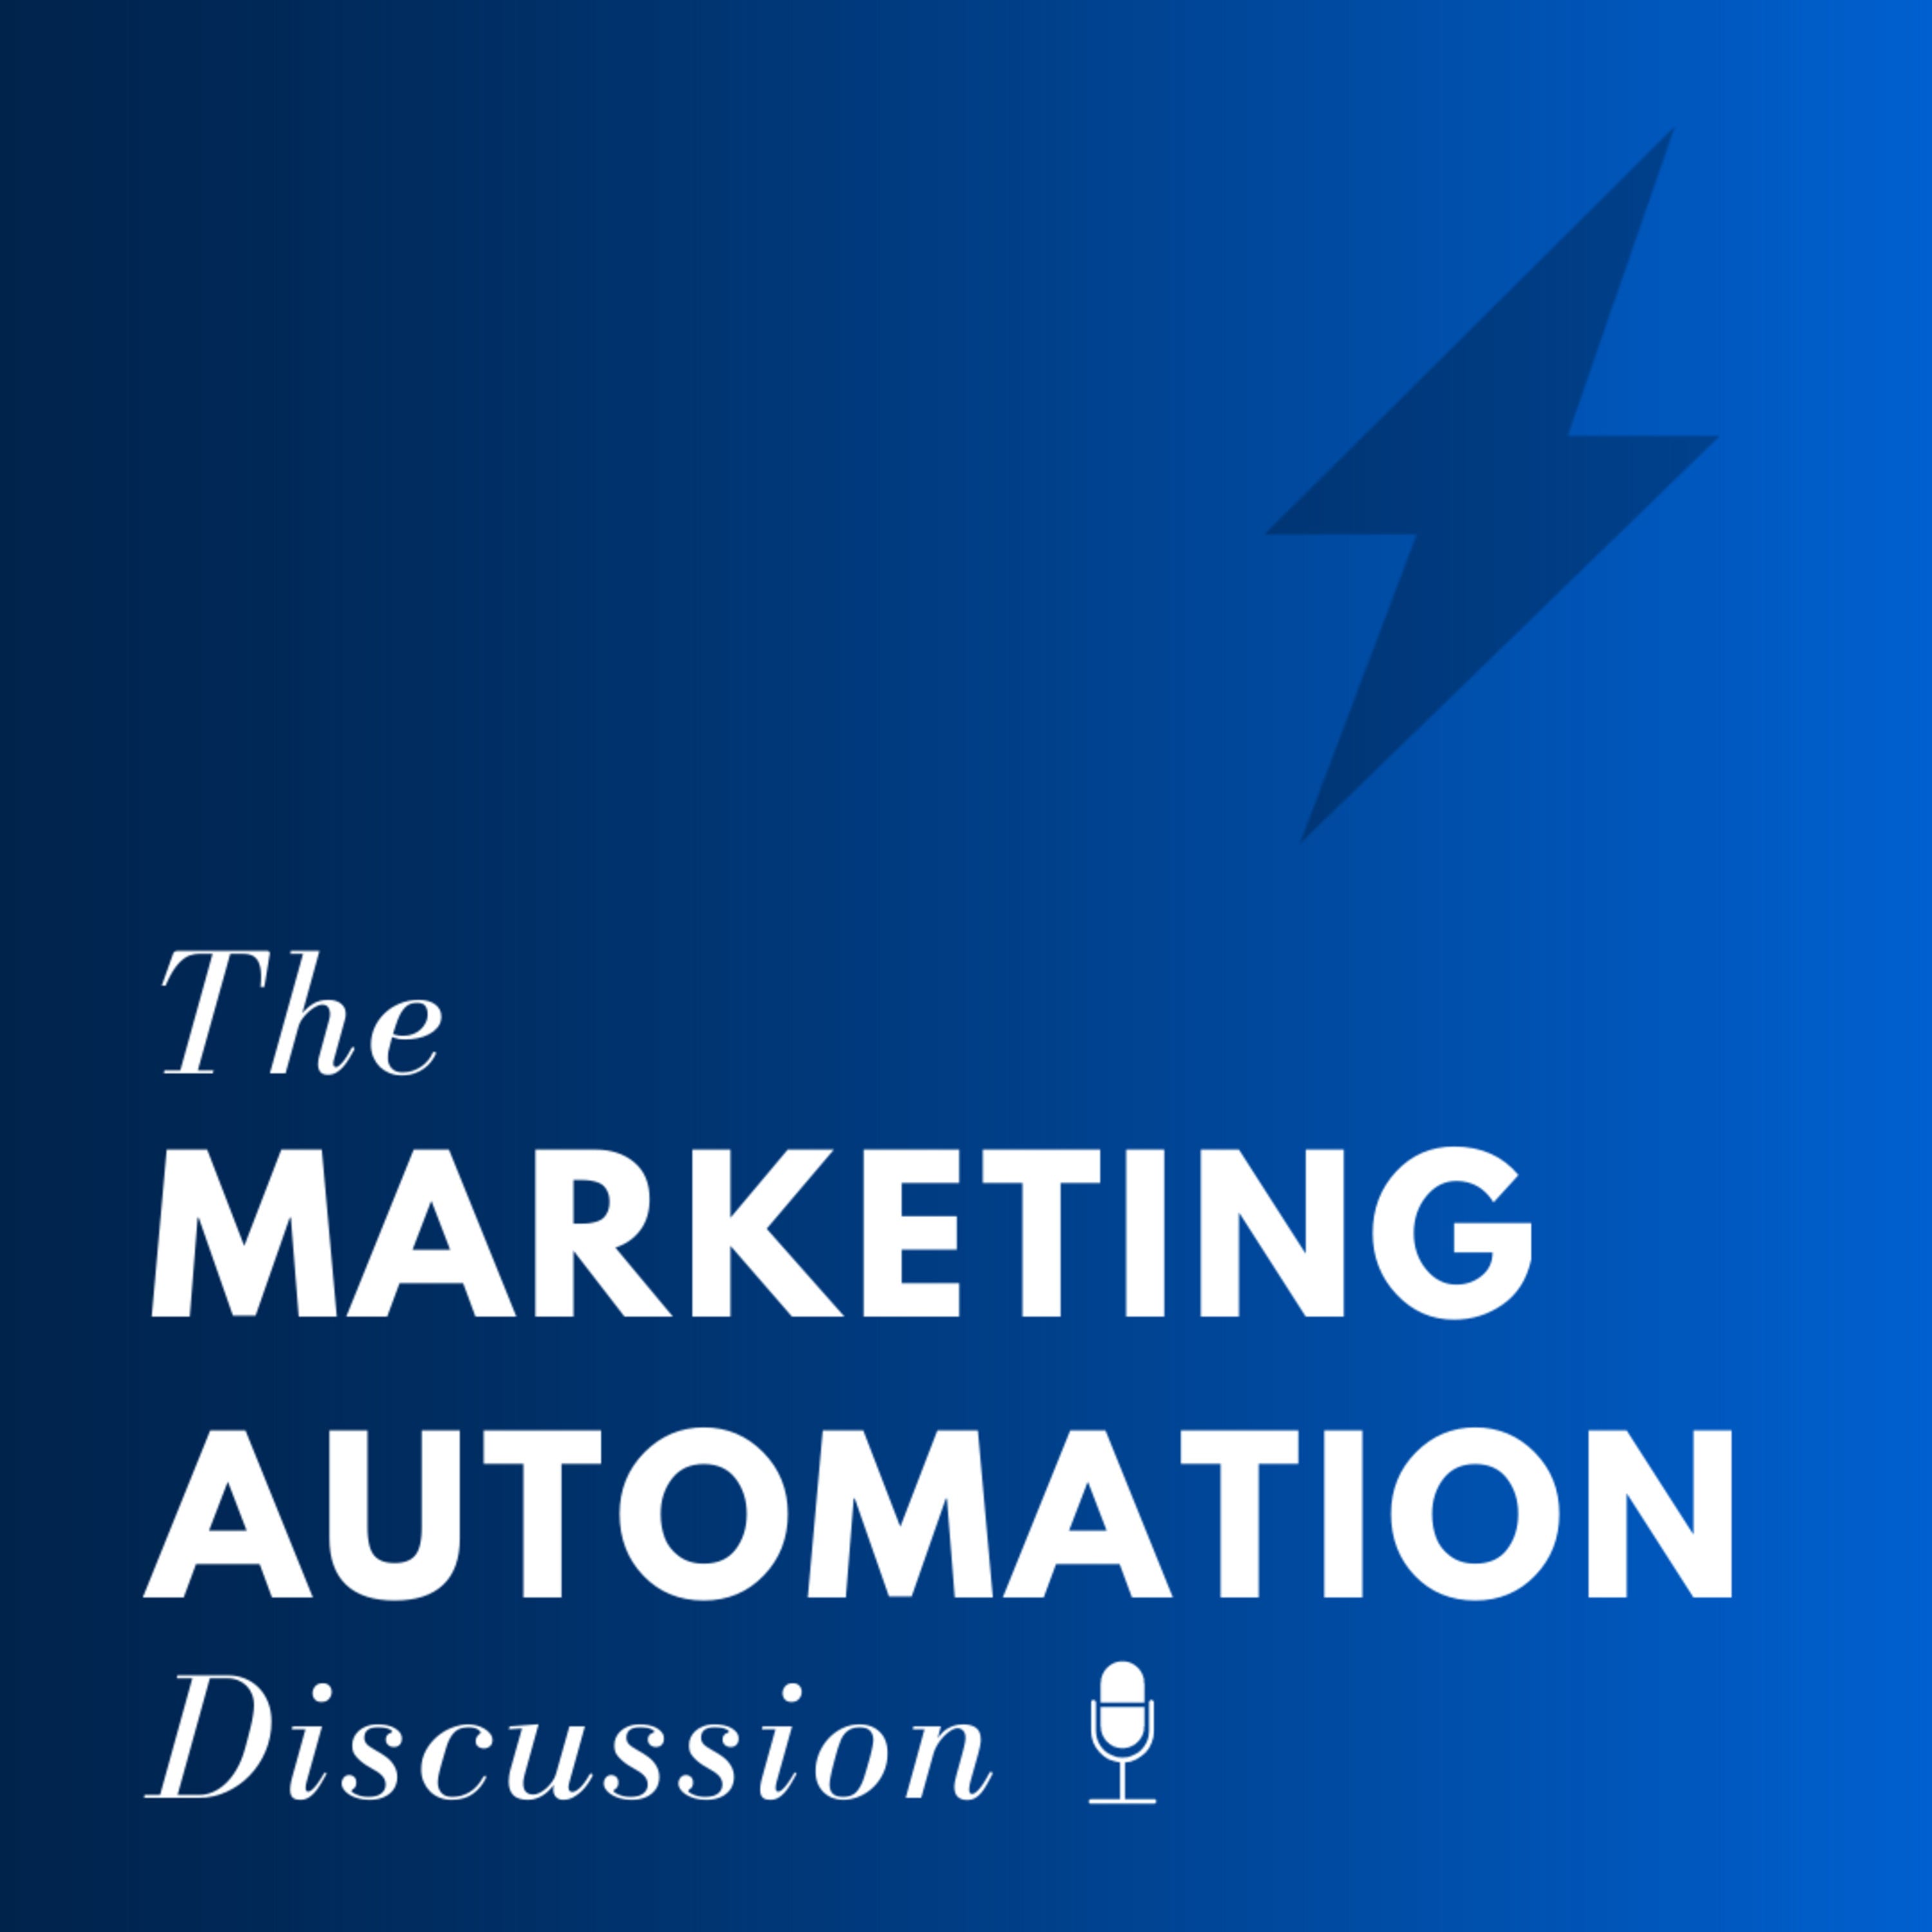 Automating Content Creation Through Podcasting with Michael Greenberg